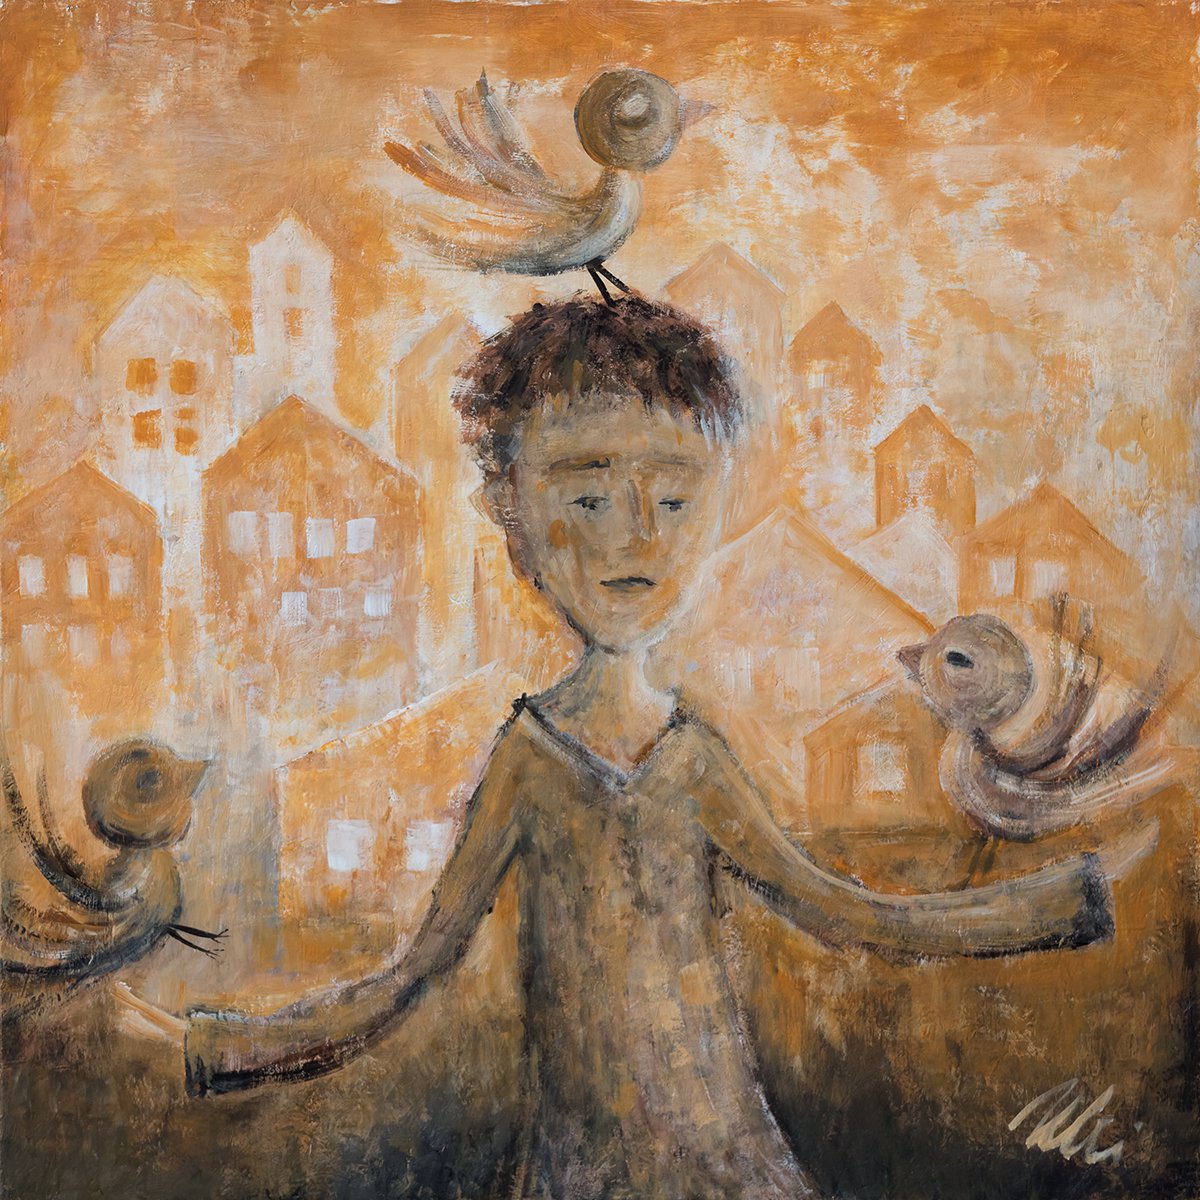 St. Francis of Assisi with birds by Peter Zelei